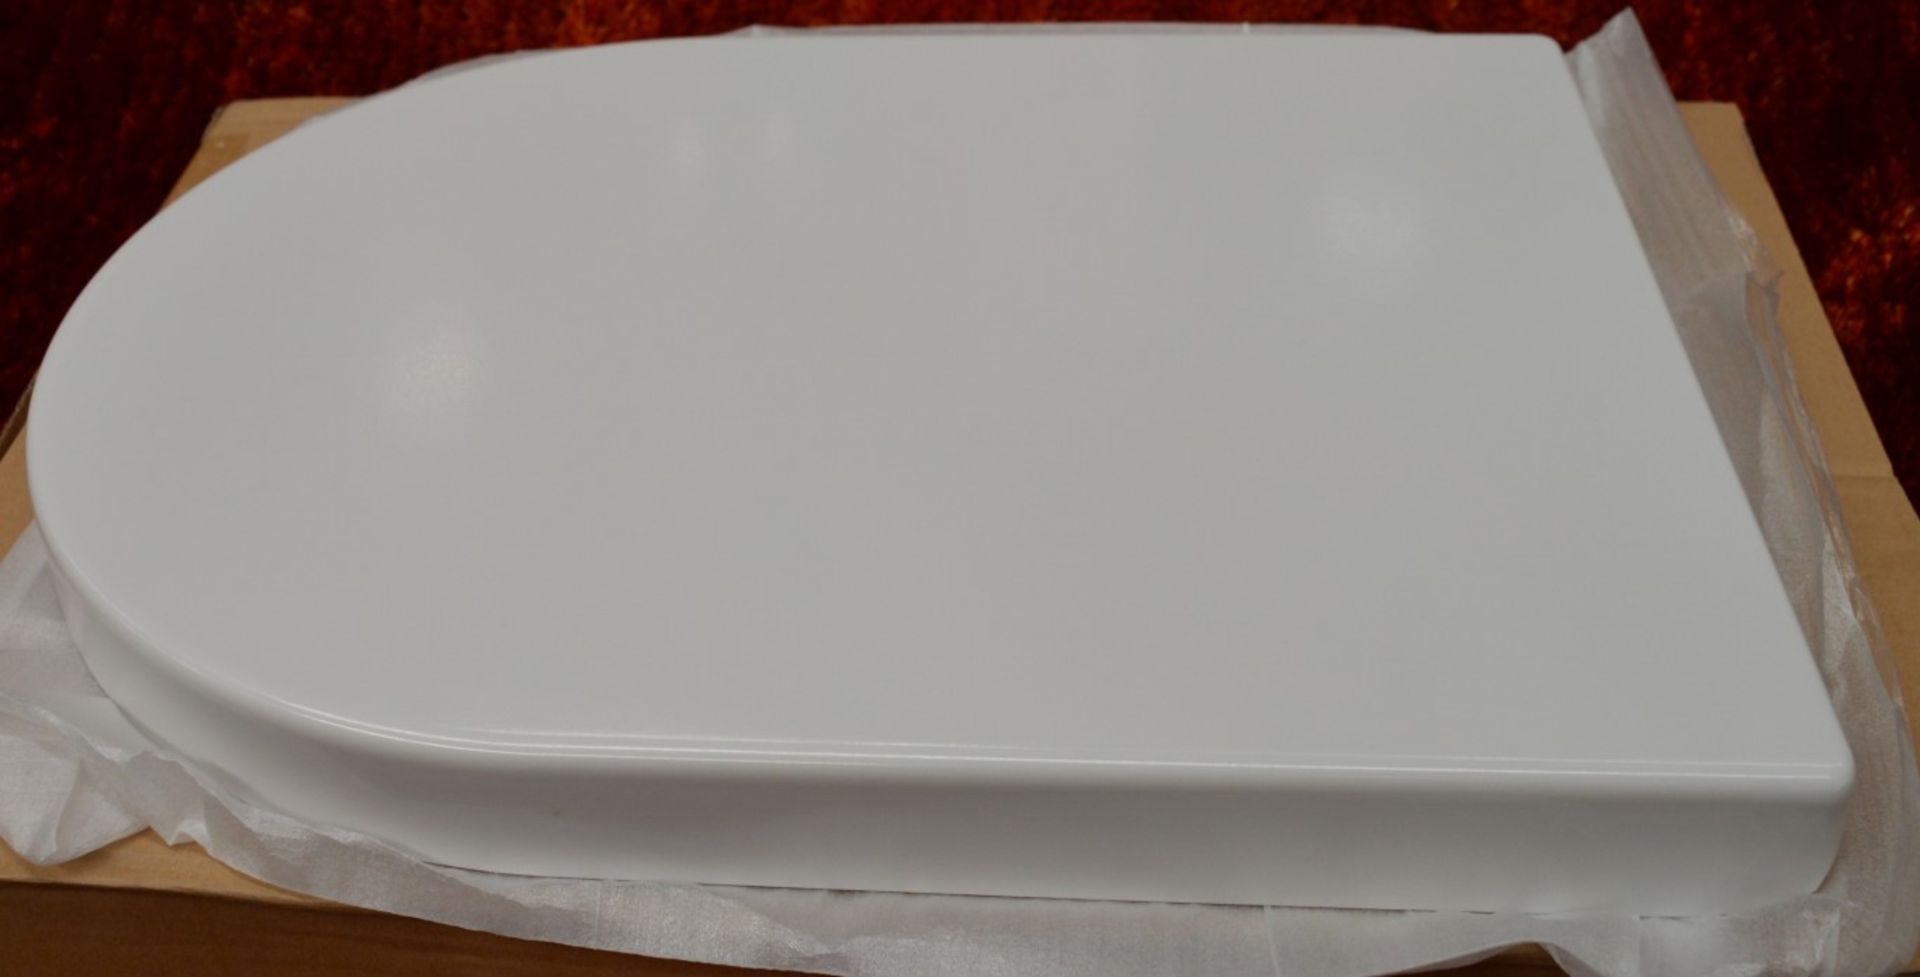 1 x Vogue Cosmos Modern White Soft Close Toilet Seat and Cover Top Fixing - Brand New Boxed - Image 2 of 5